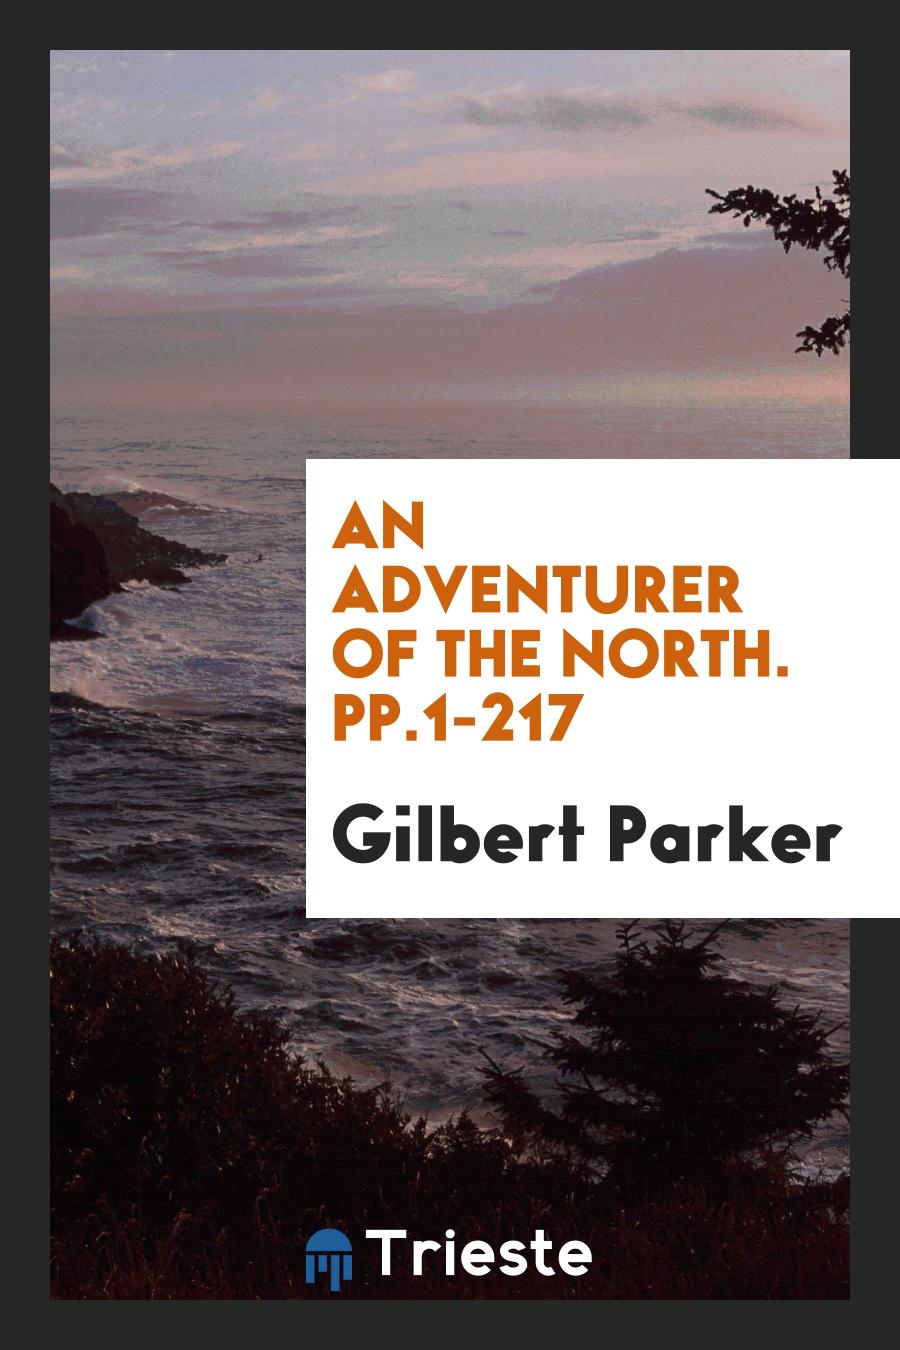 An Adventurer of the North. pp.1-217